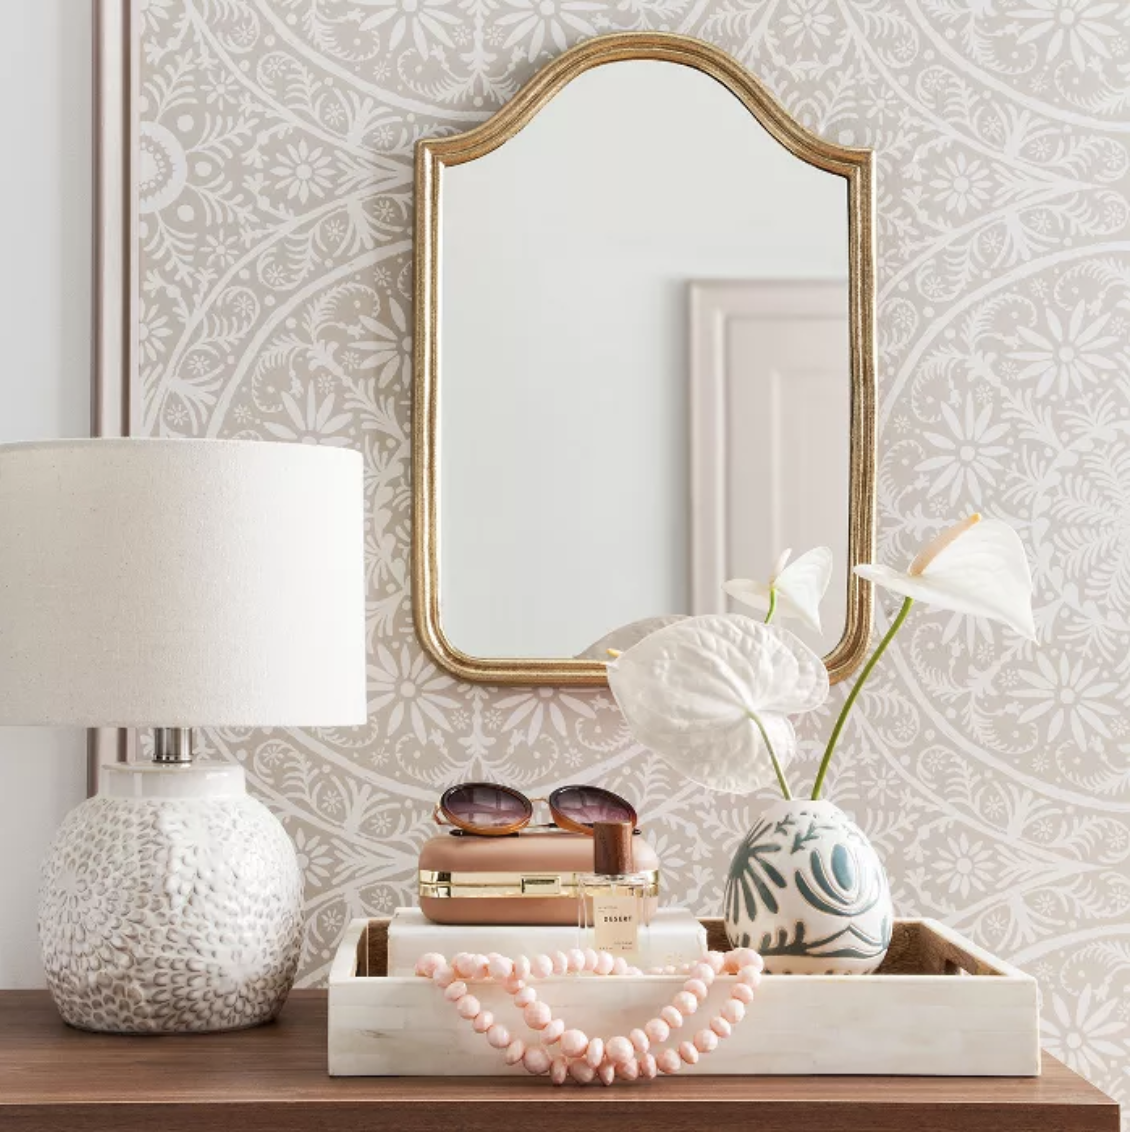 Beige color wallpaper with a white floral pattern